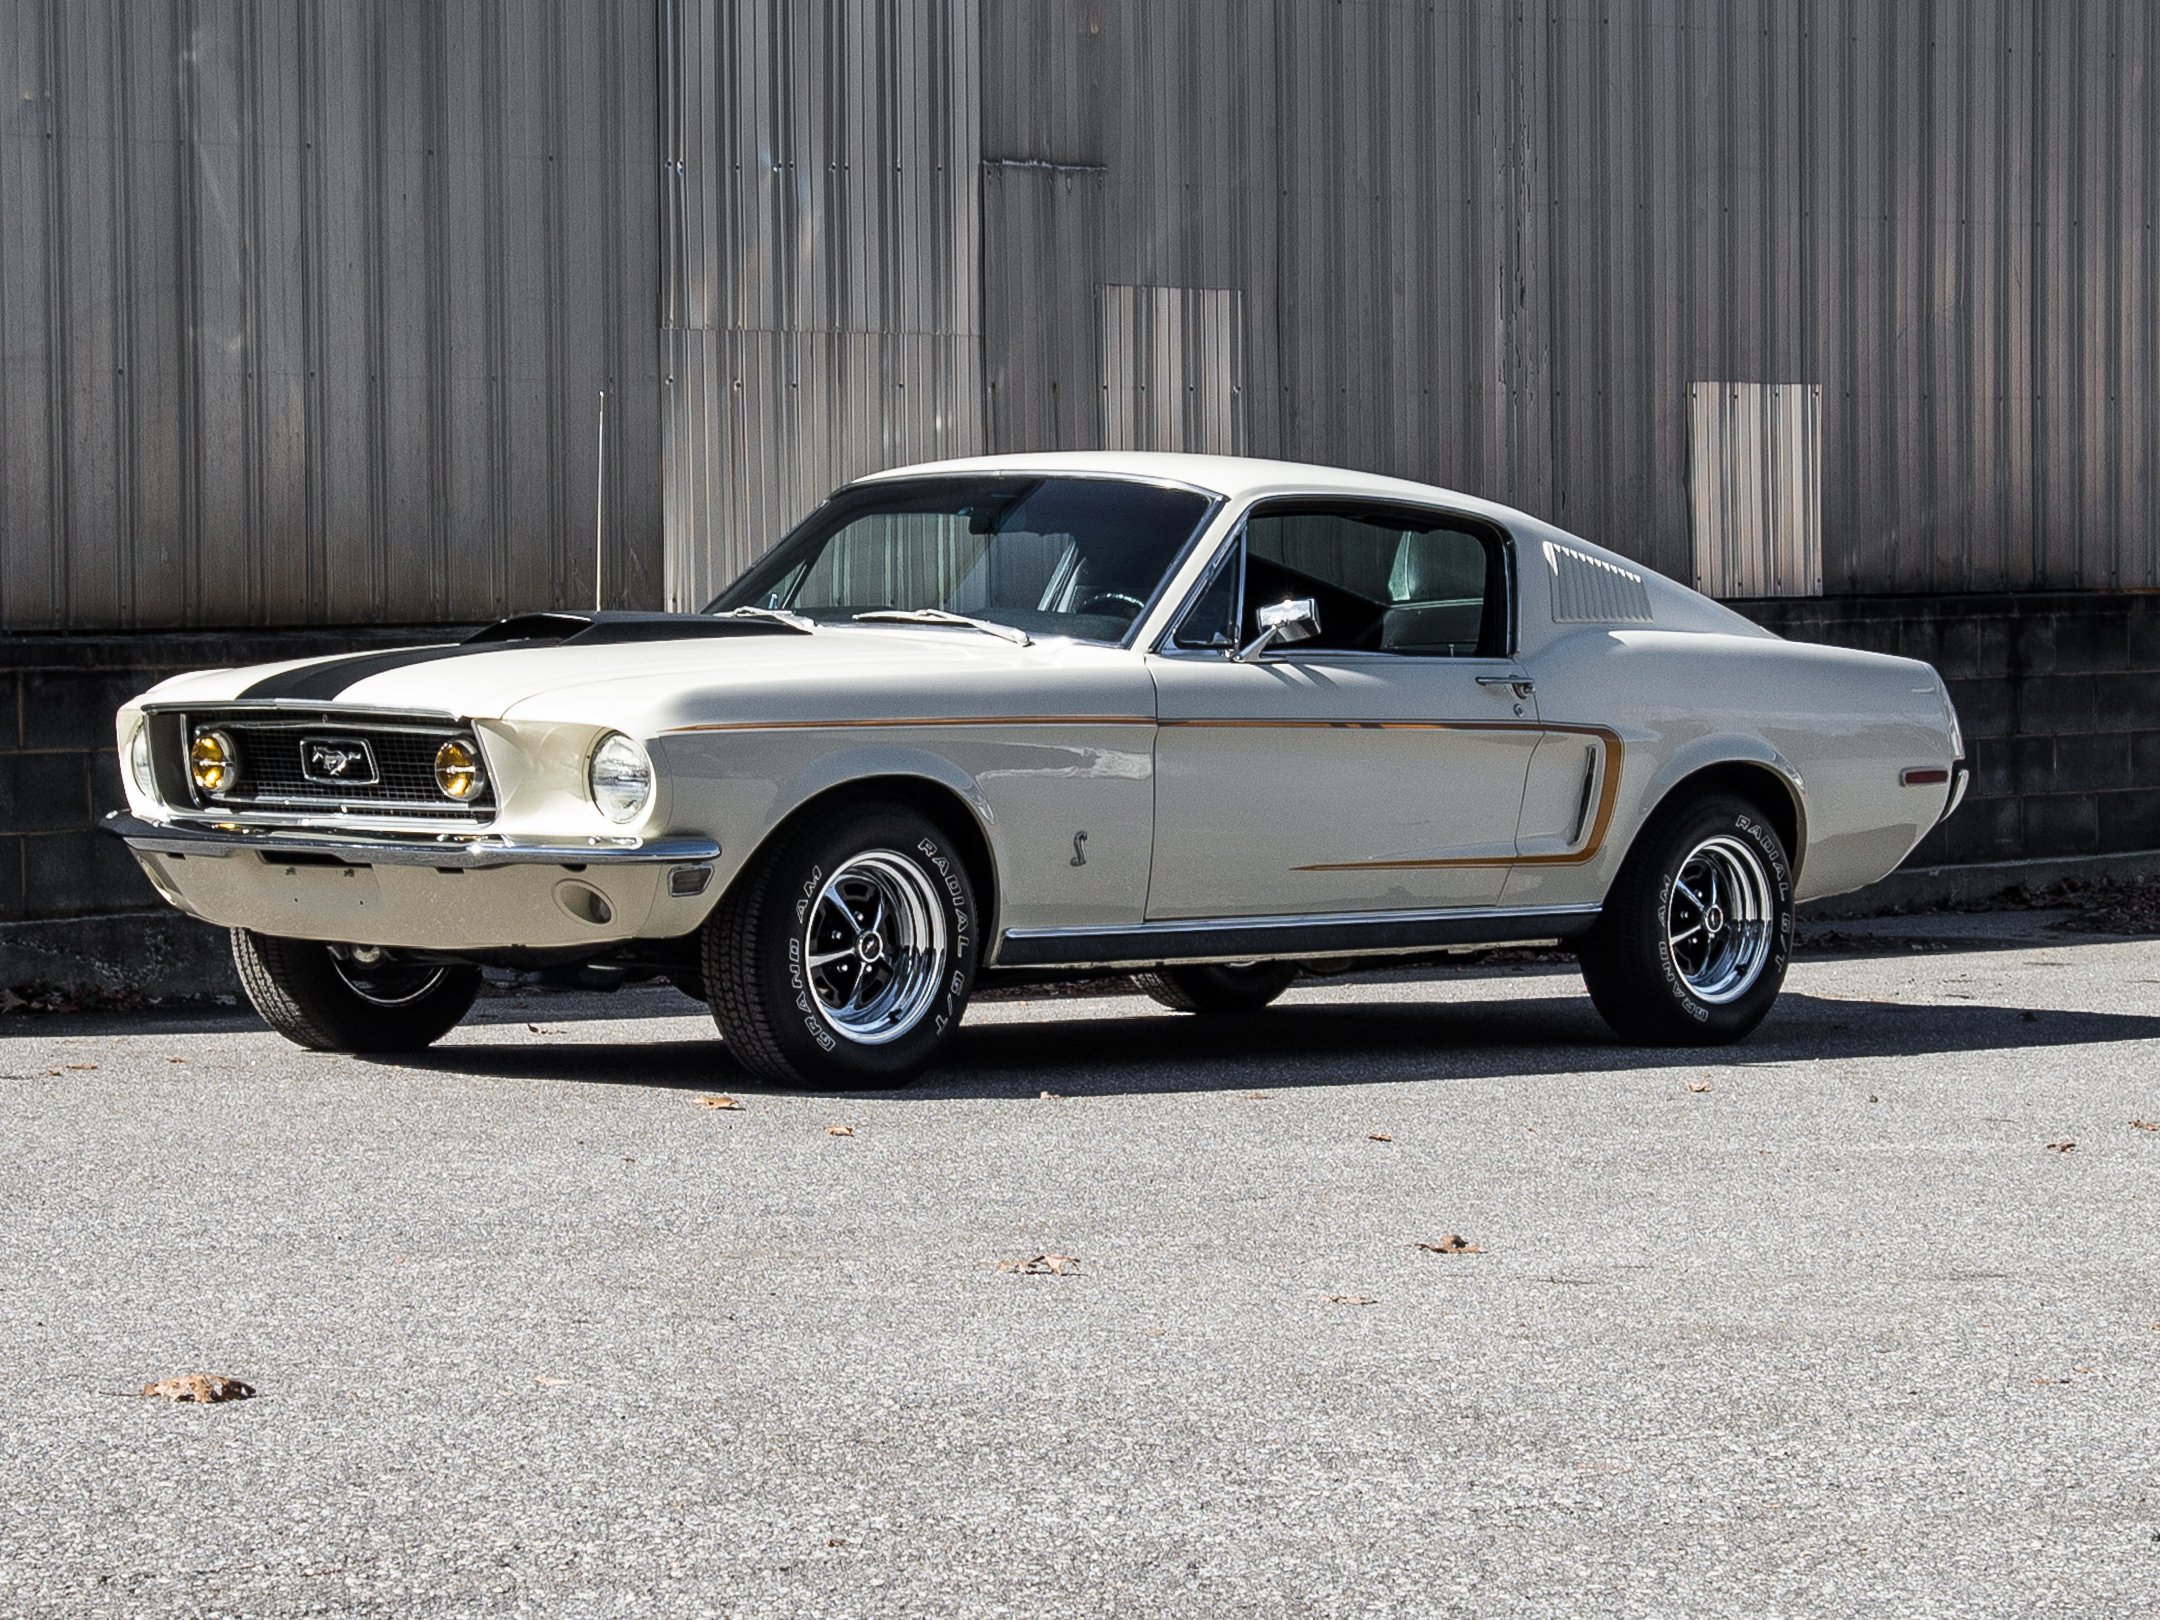 1968, Ford, Mustang, Gt, Fastback, White, Muscle, Classic, Old, Usa, 2160x1620 01 Wallpaper